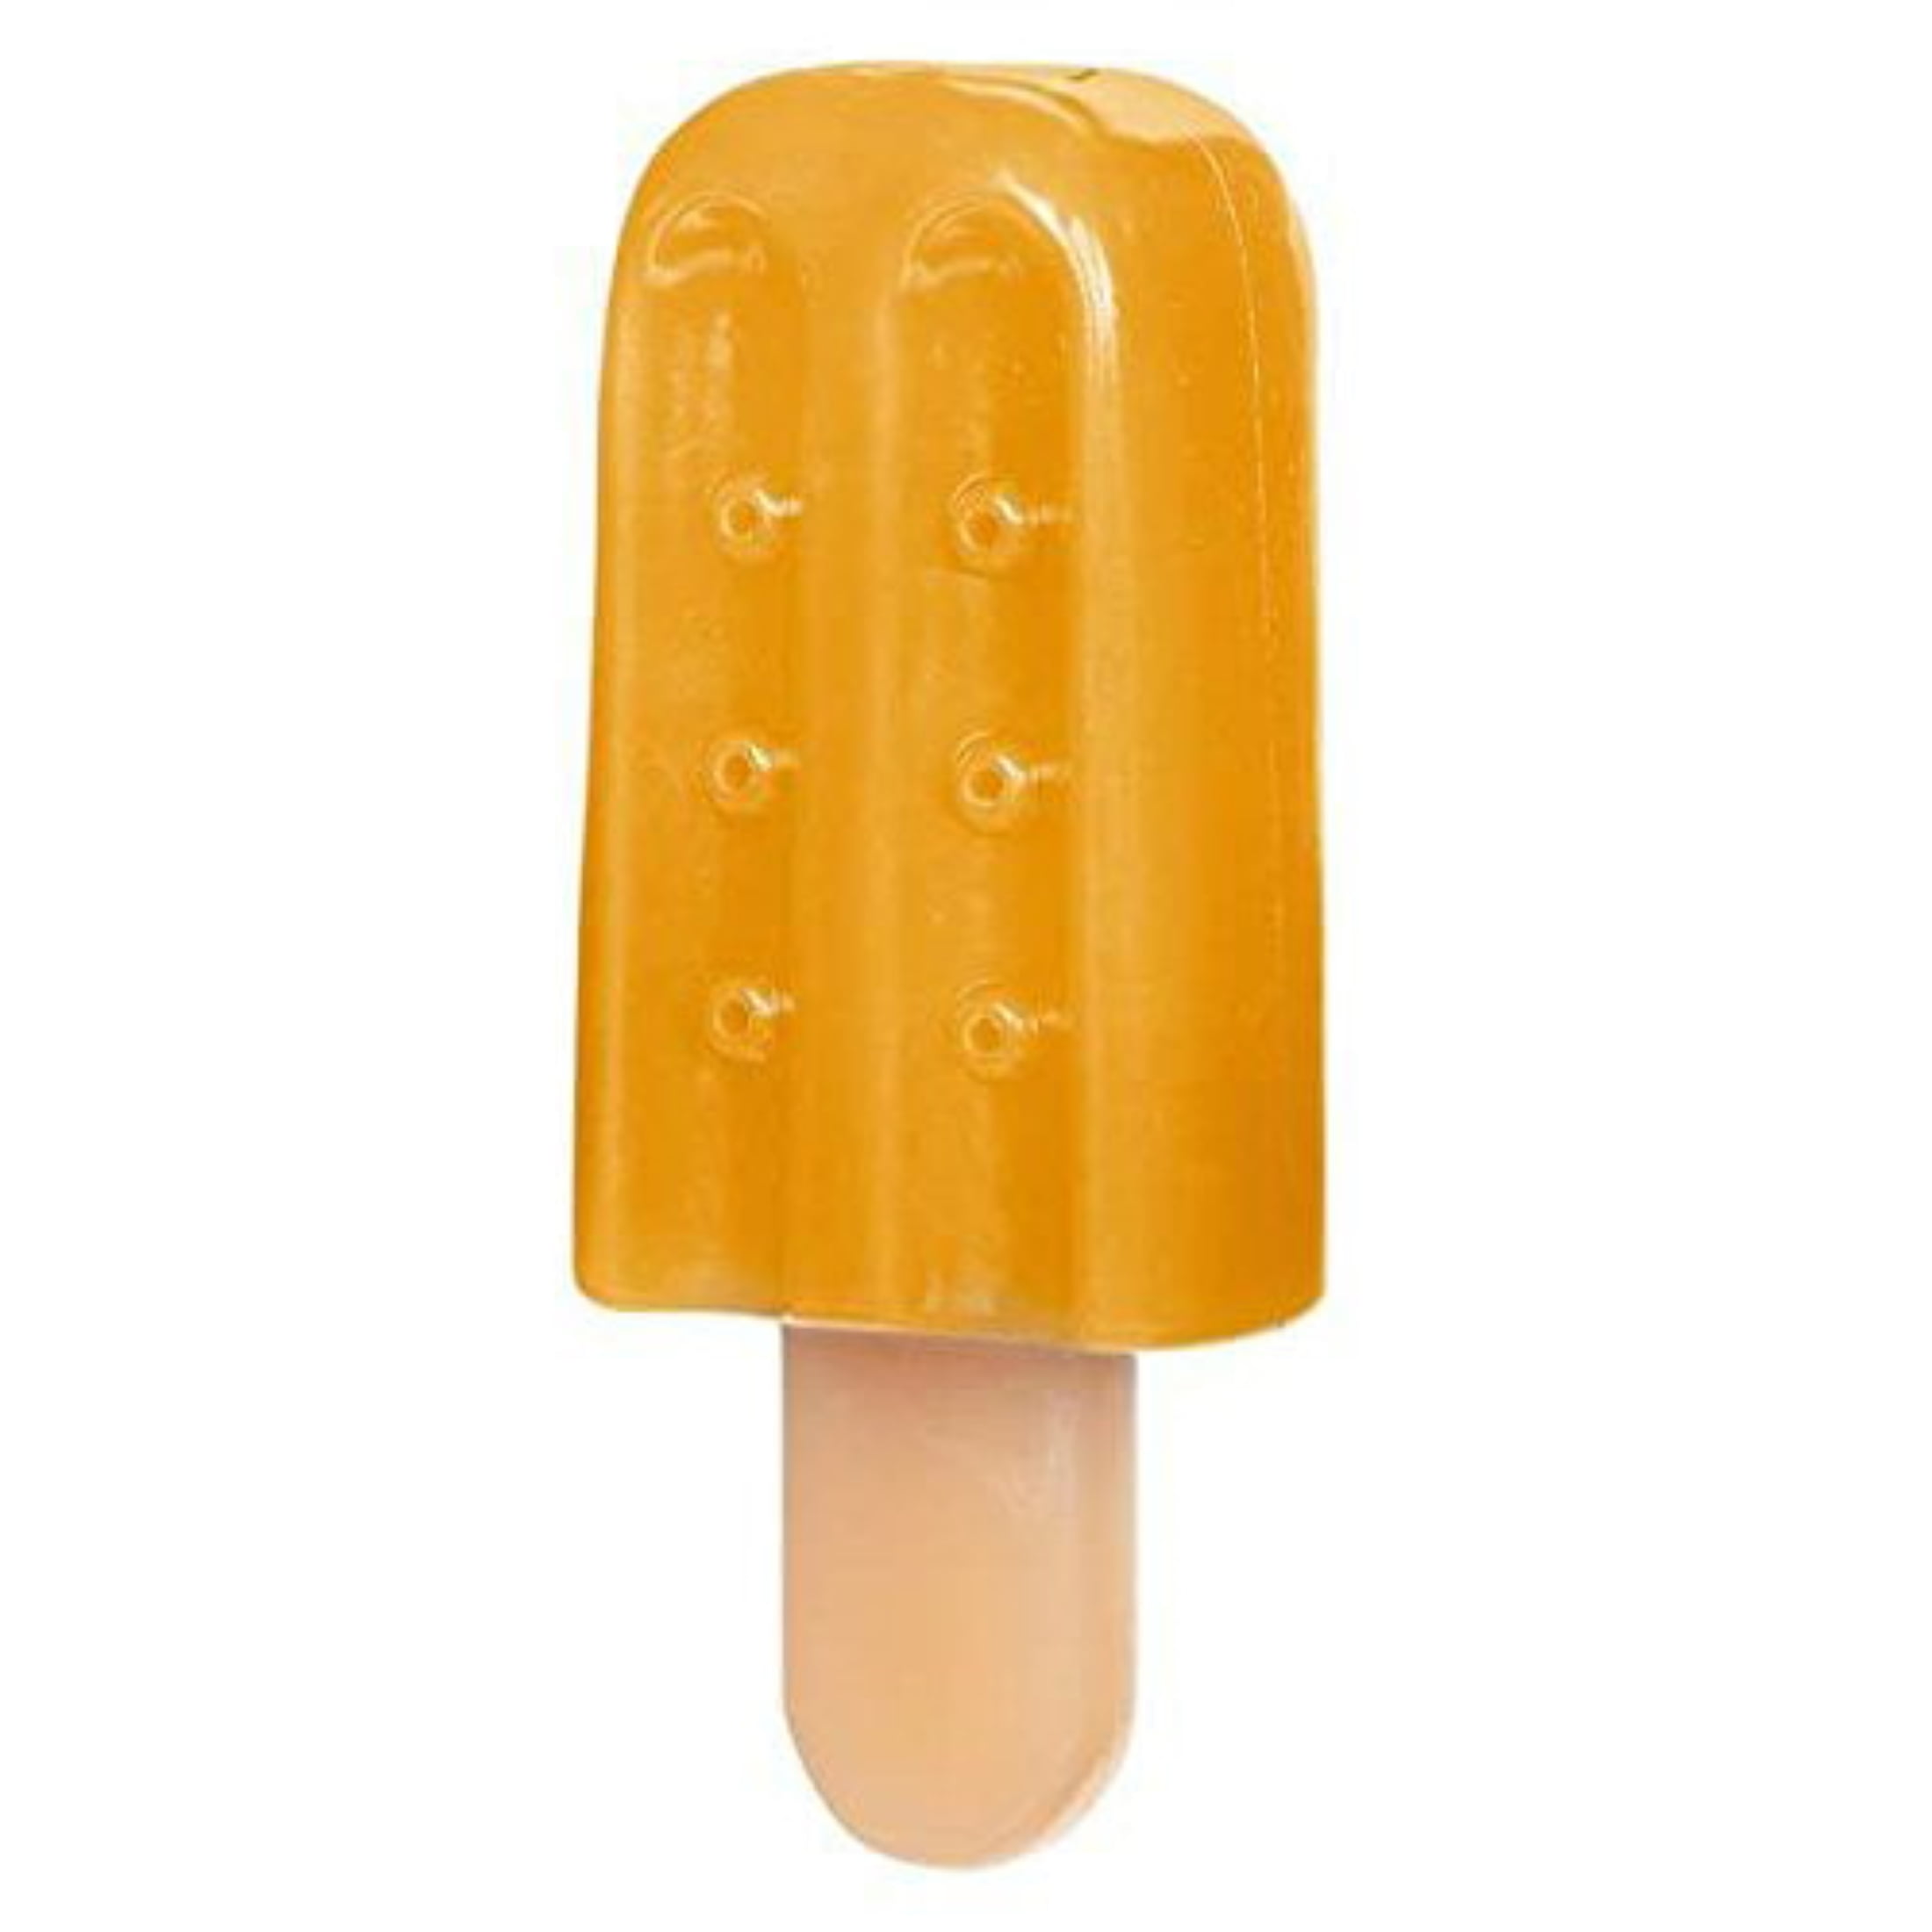 New Bark Box Super Chewer “ Creamsicle Pup ”Ice Cream / Popsicle Dog Toy  M/L Sz